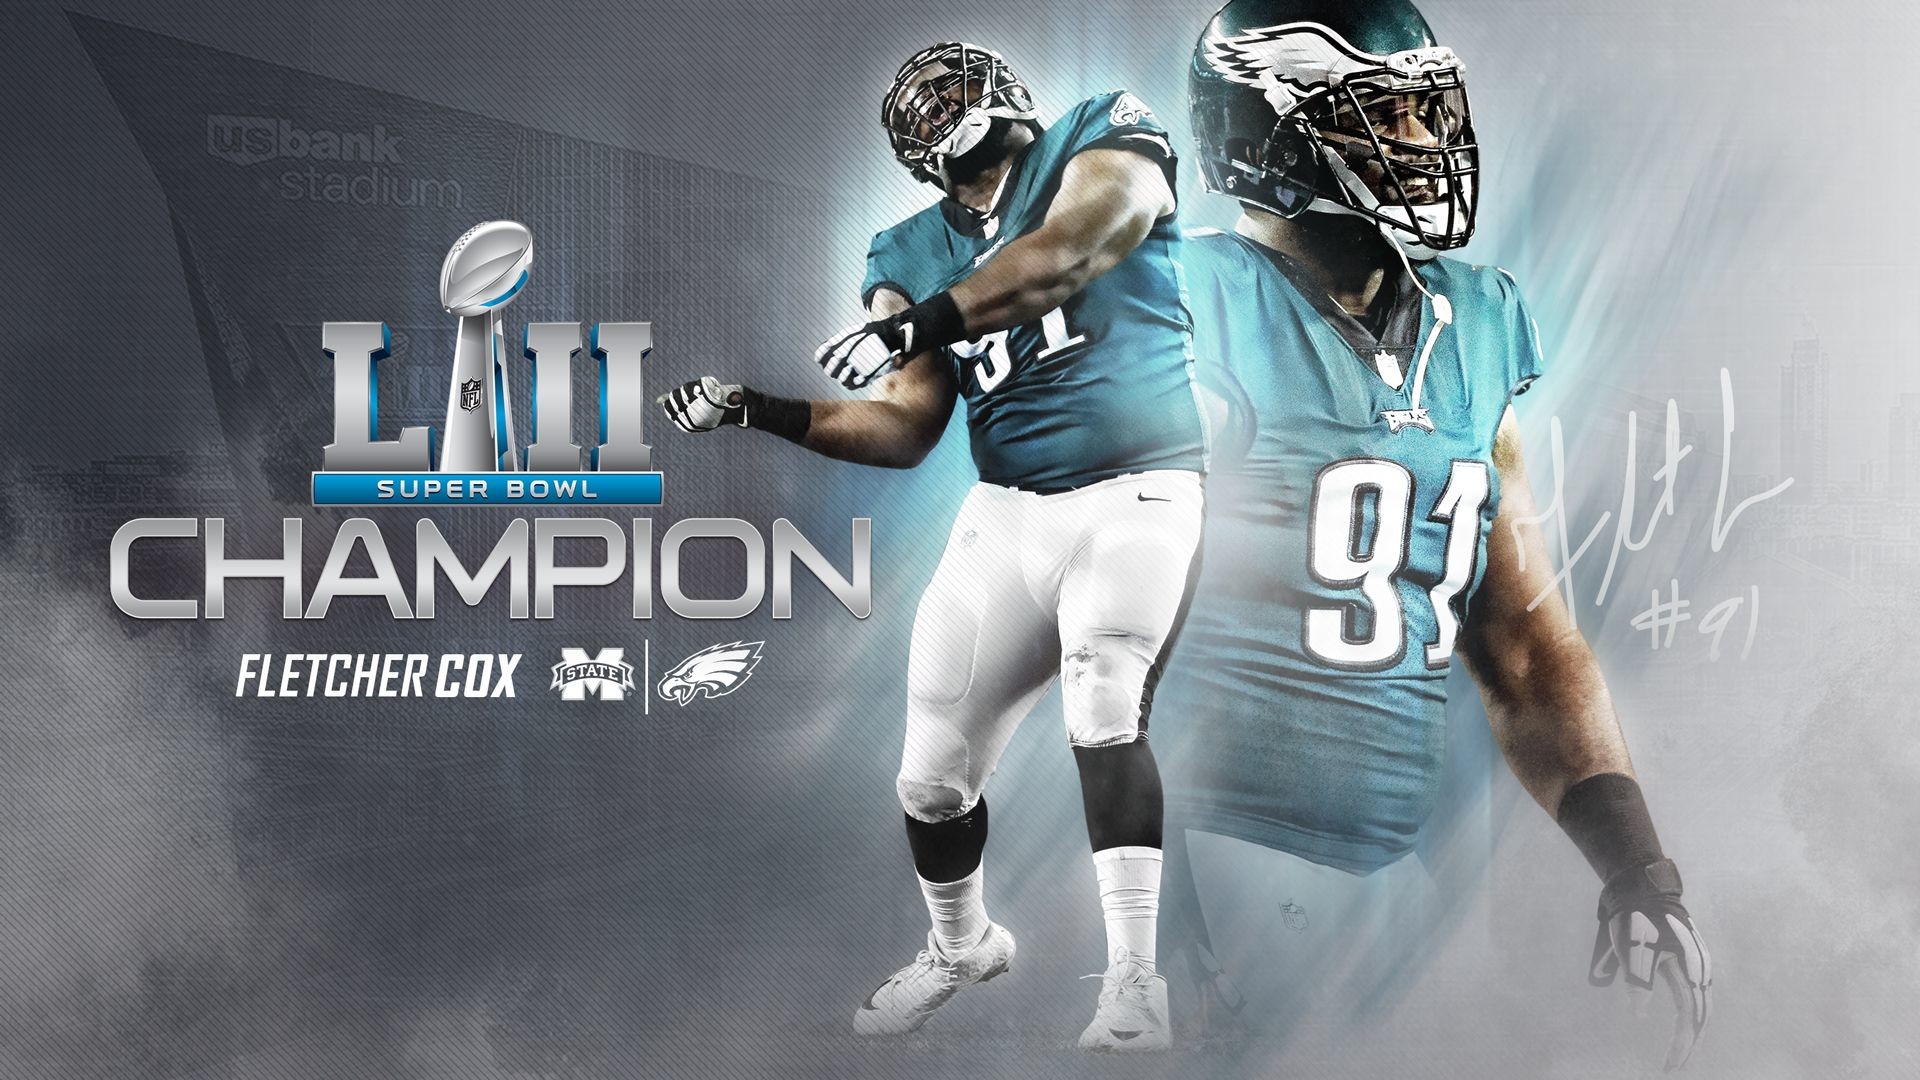 1920x1080 From State to Super Bowl: Fletcher Cox Crowned Super Bowl Champion .